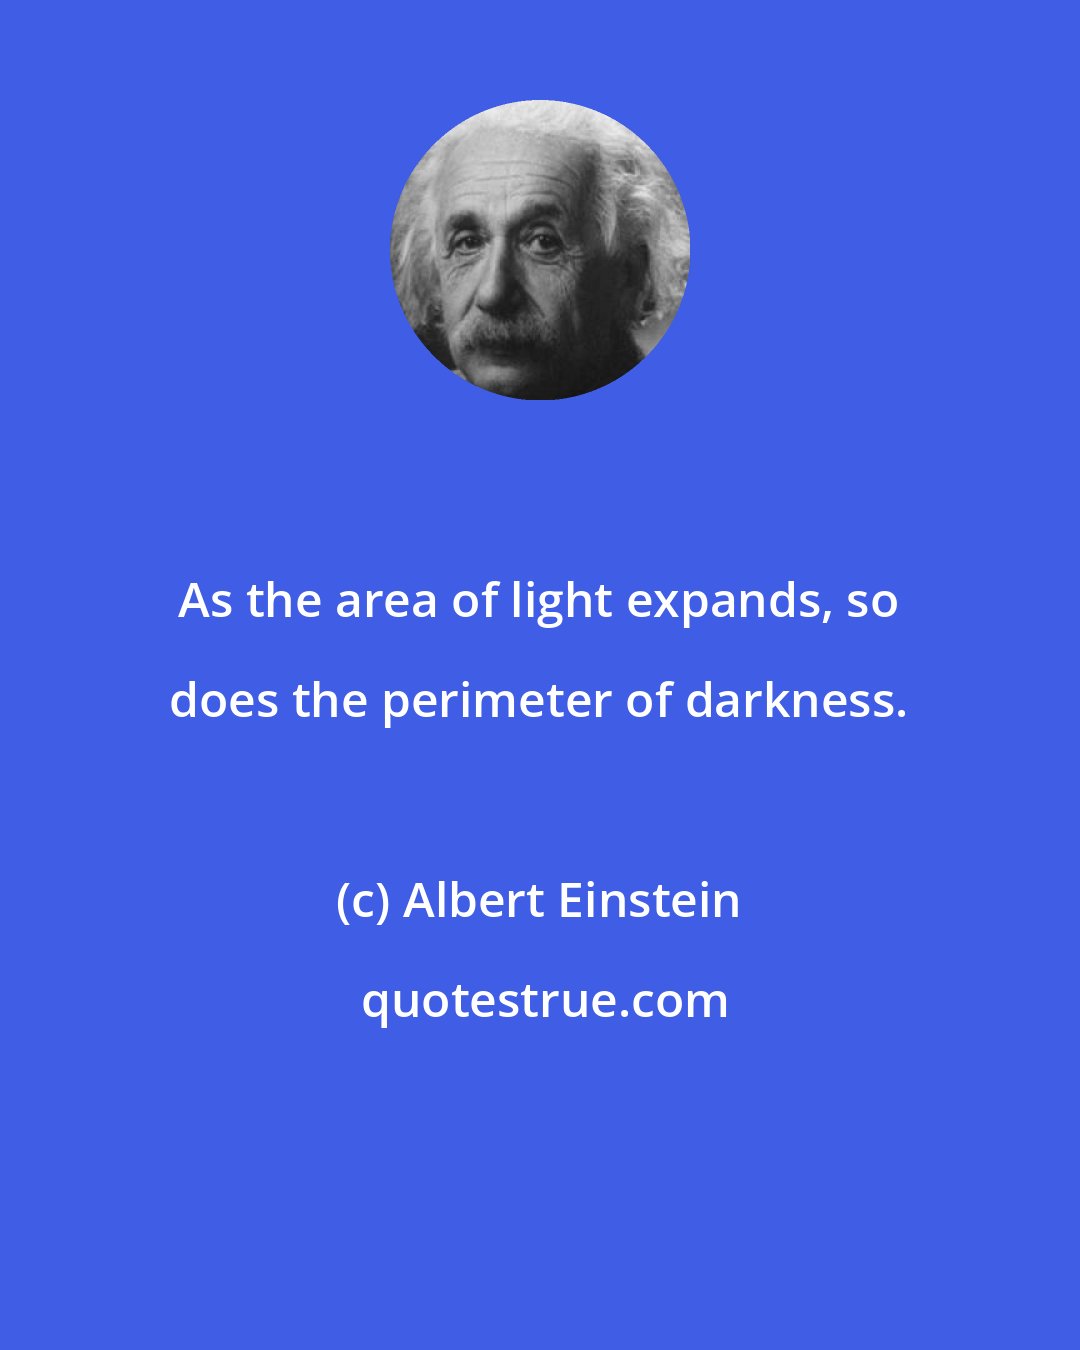 Albert Einstein: As the area of light expands, so does the perimeter of darkness.